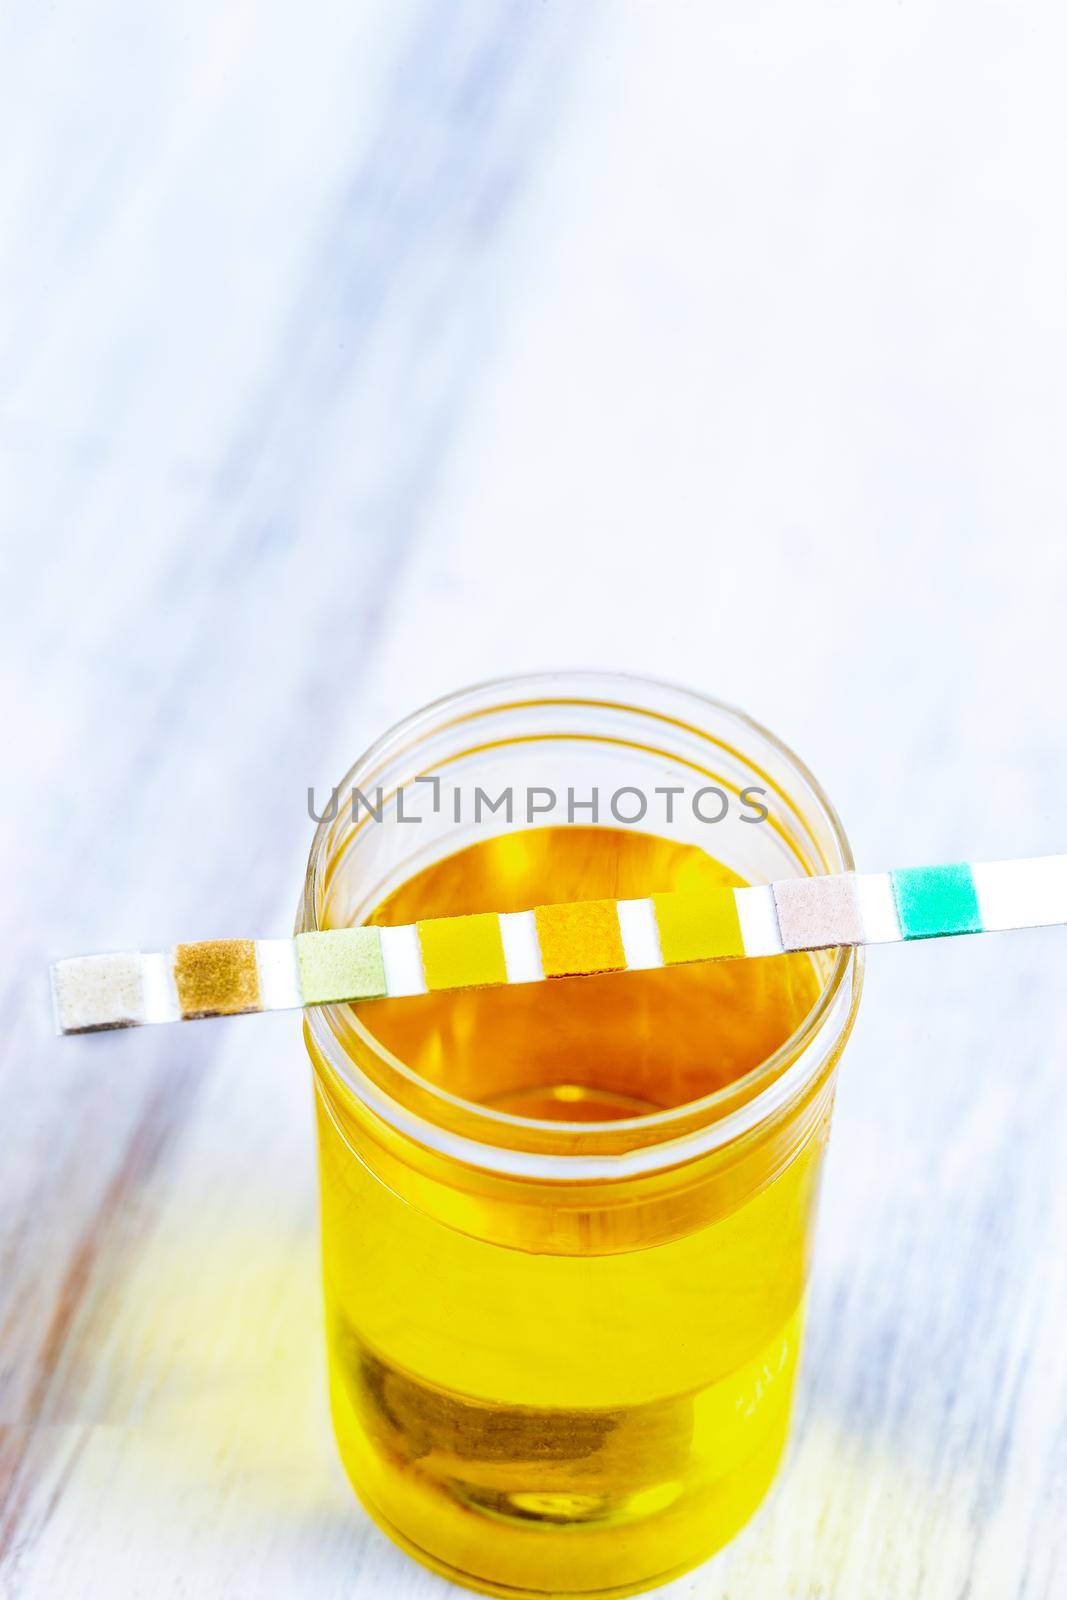 Medical report and urine test strips